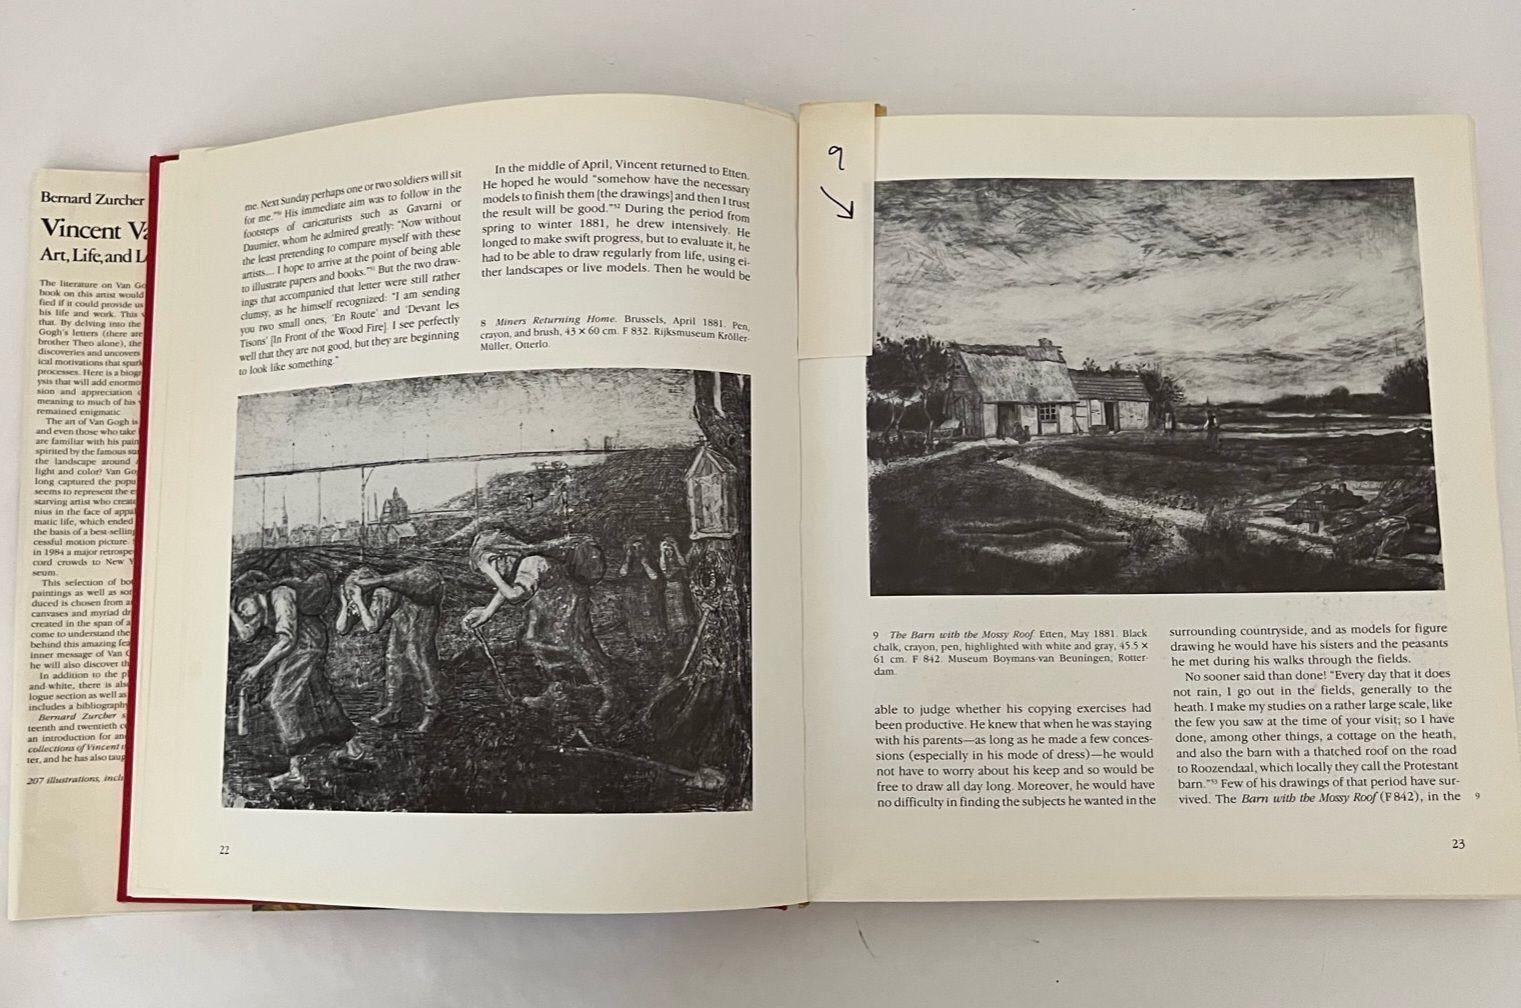 1985 Vincent Van Gogh Art Life and Letters by Bernard Zucker Hardcover Rizzolli In Good Condition For Sale In North Hollywood, CA